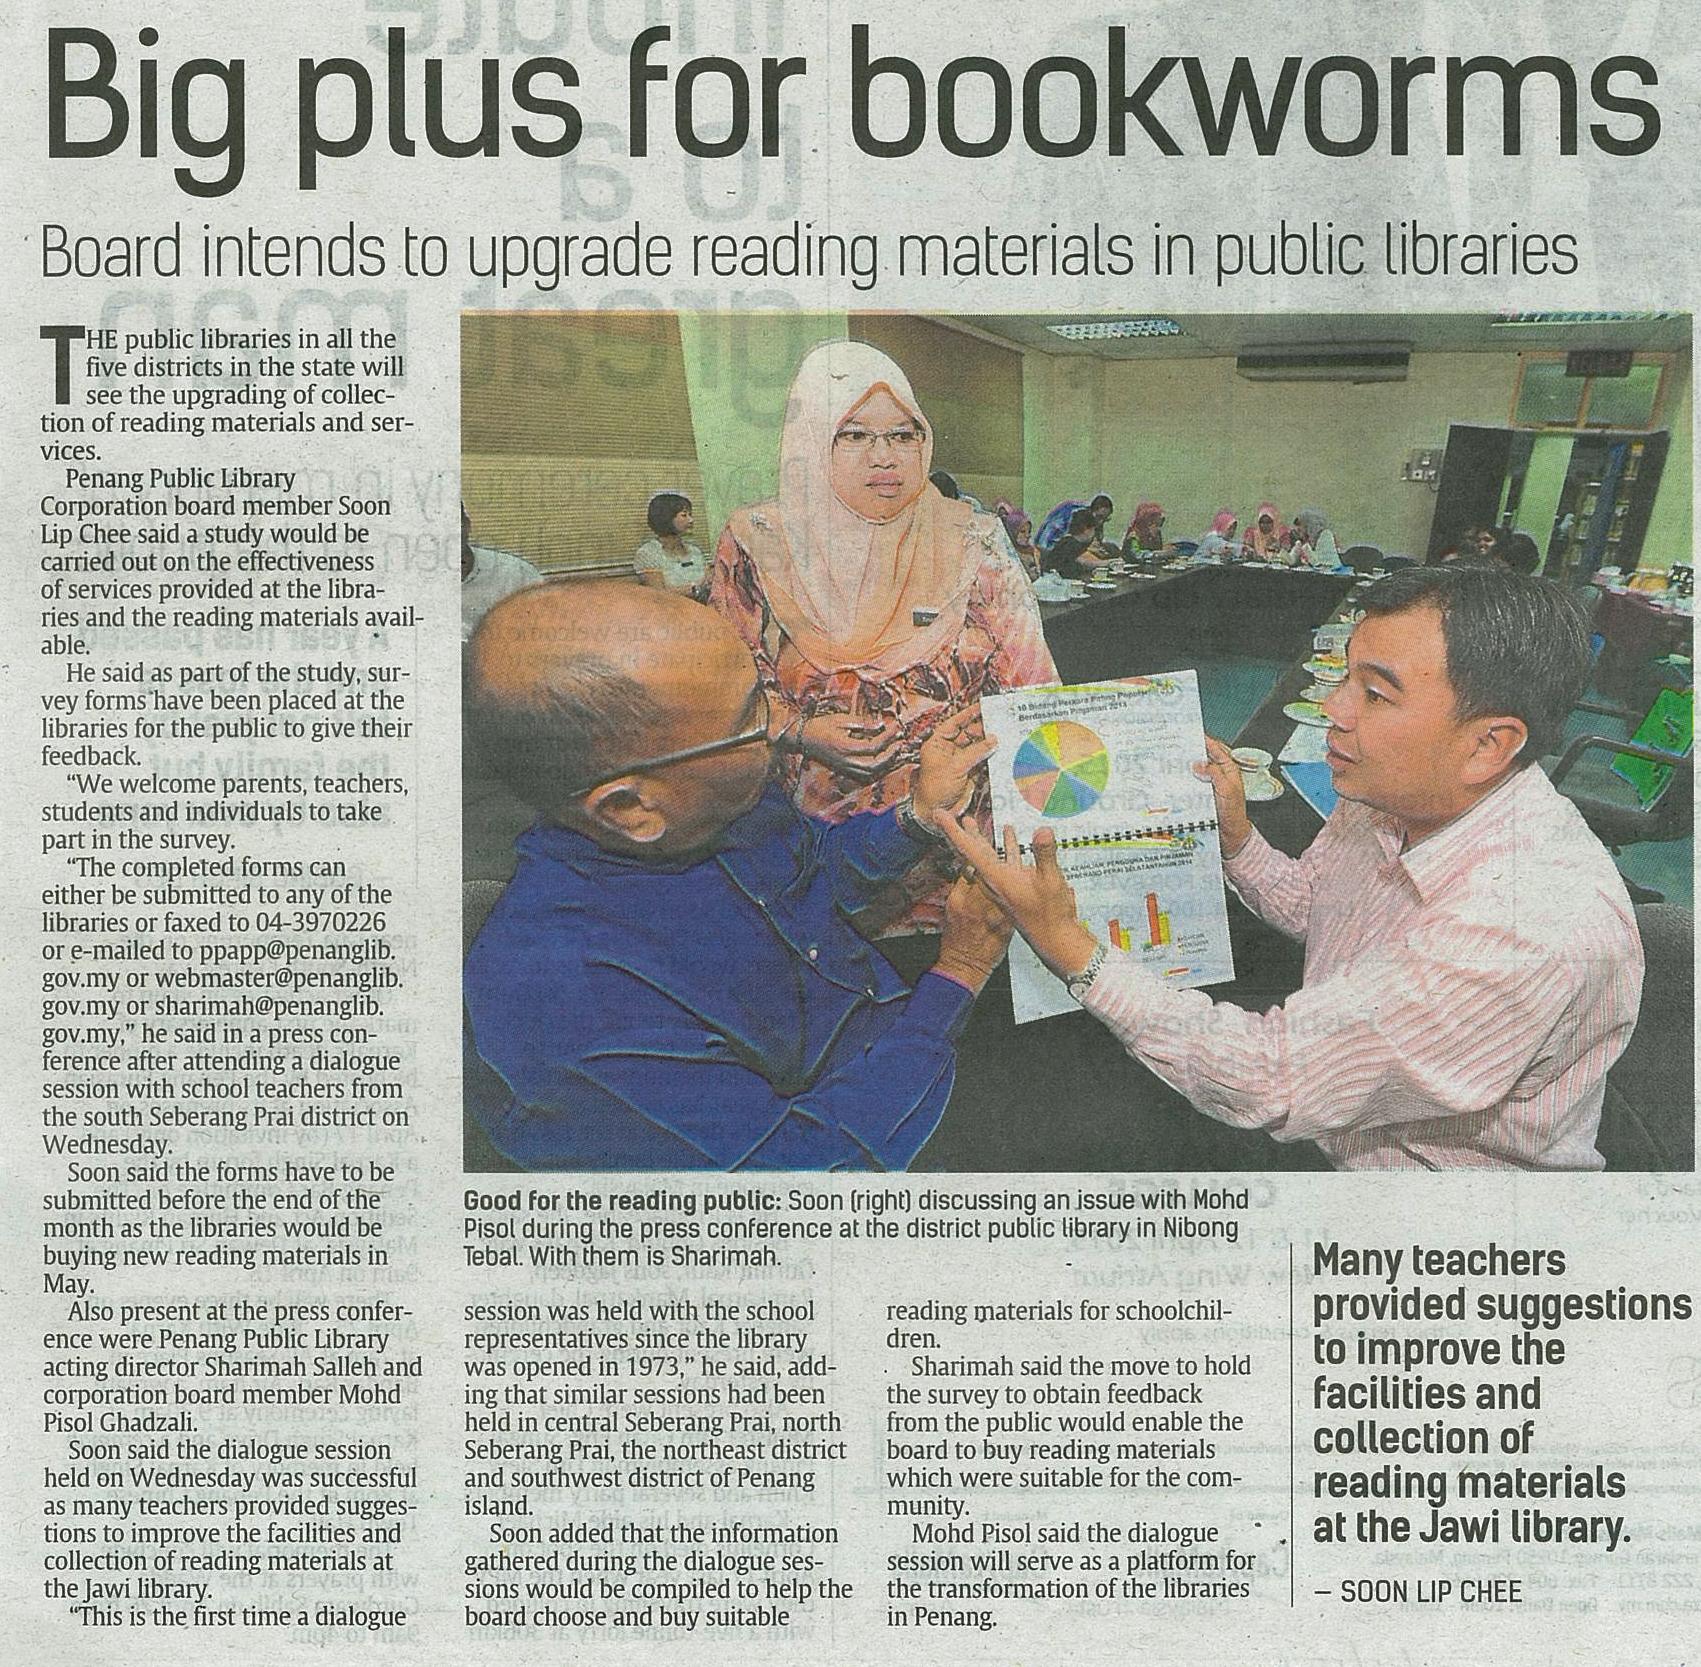 4 April 2015 Big plus for bookworms The Star